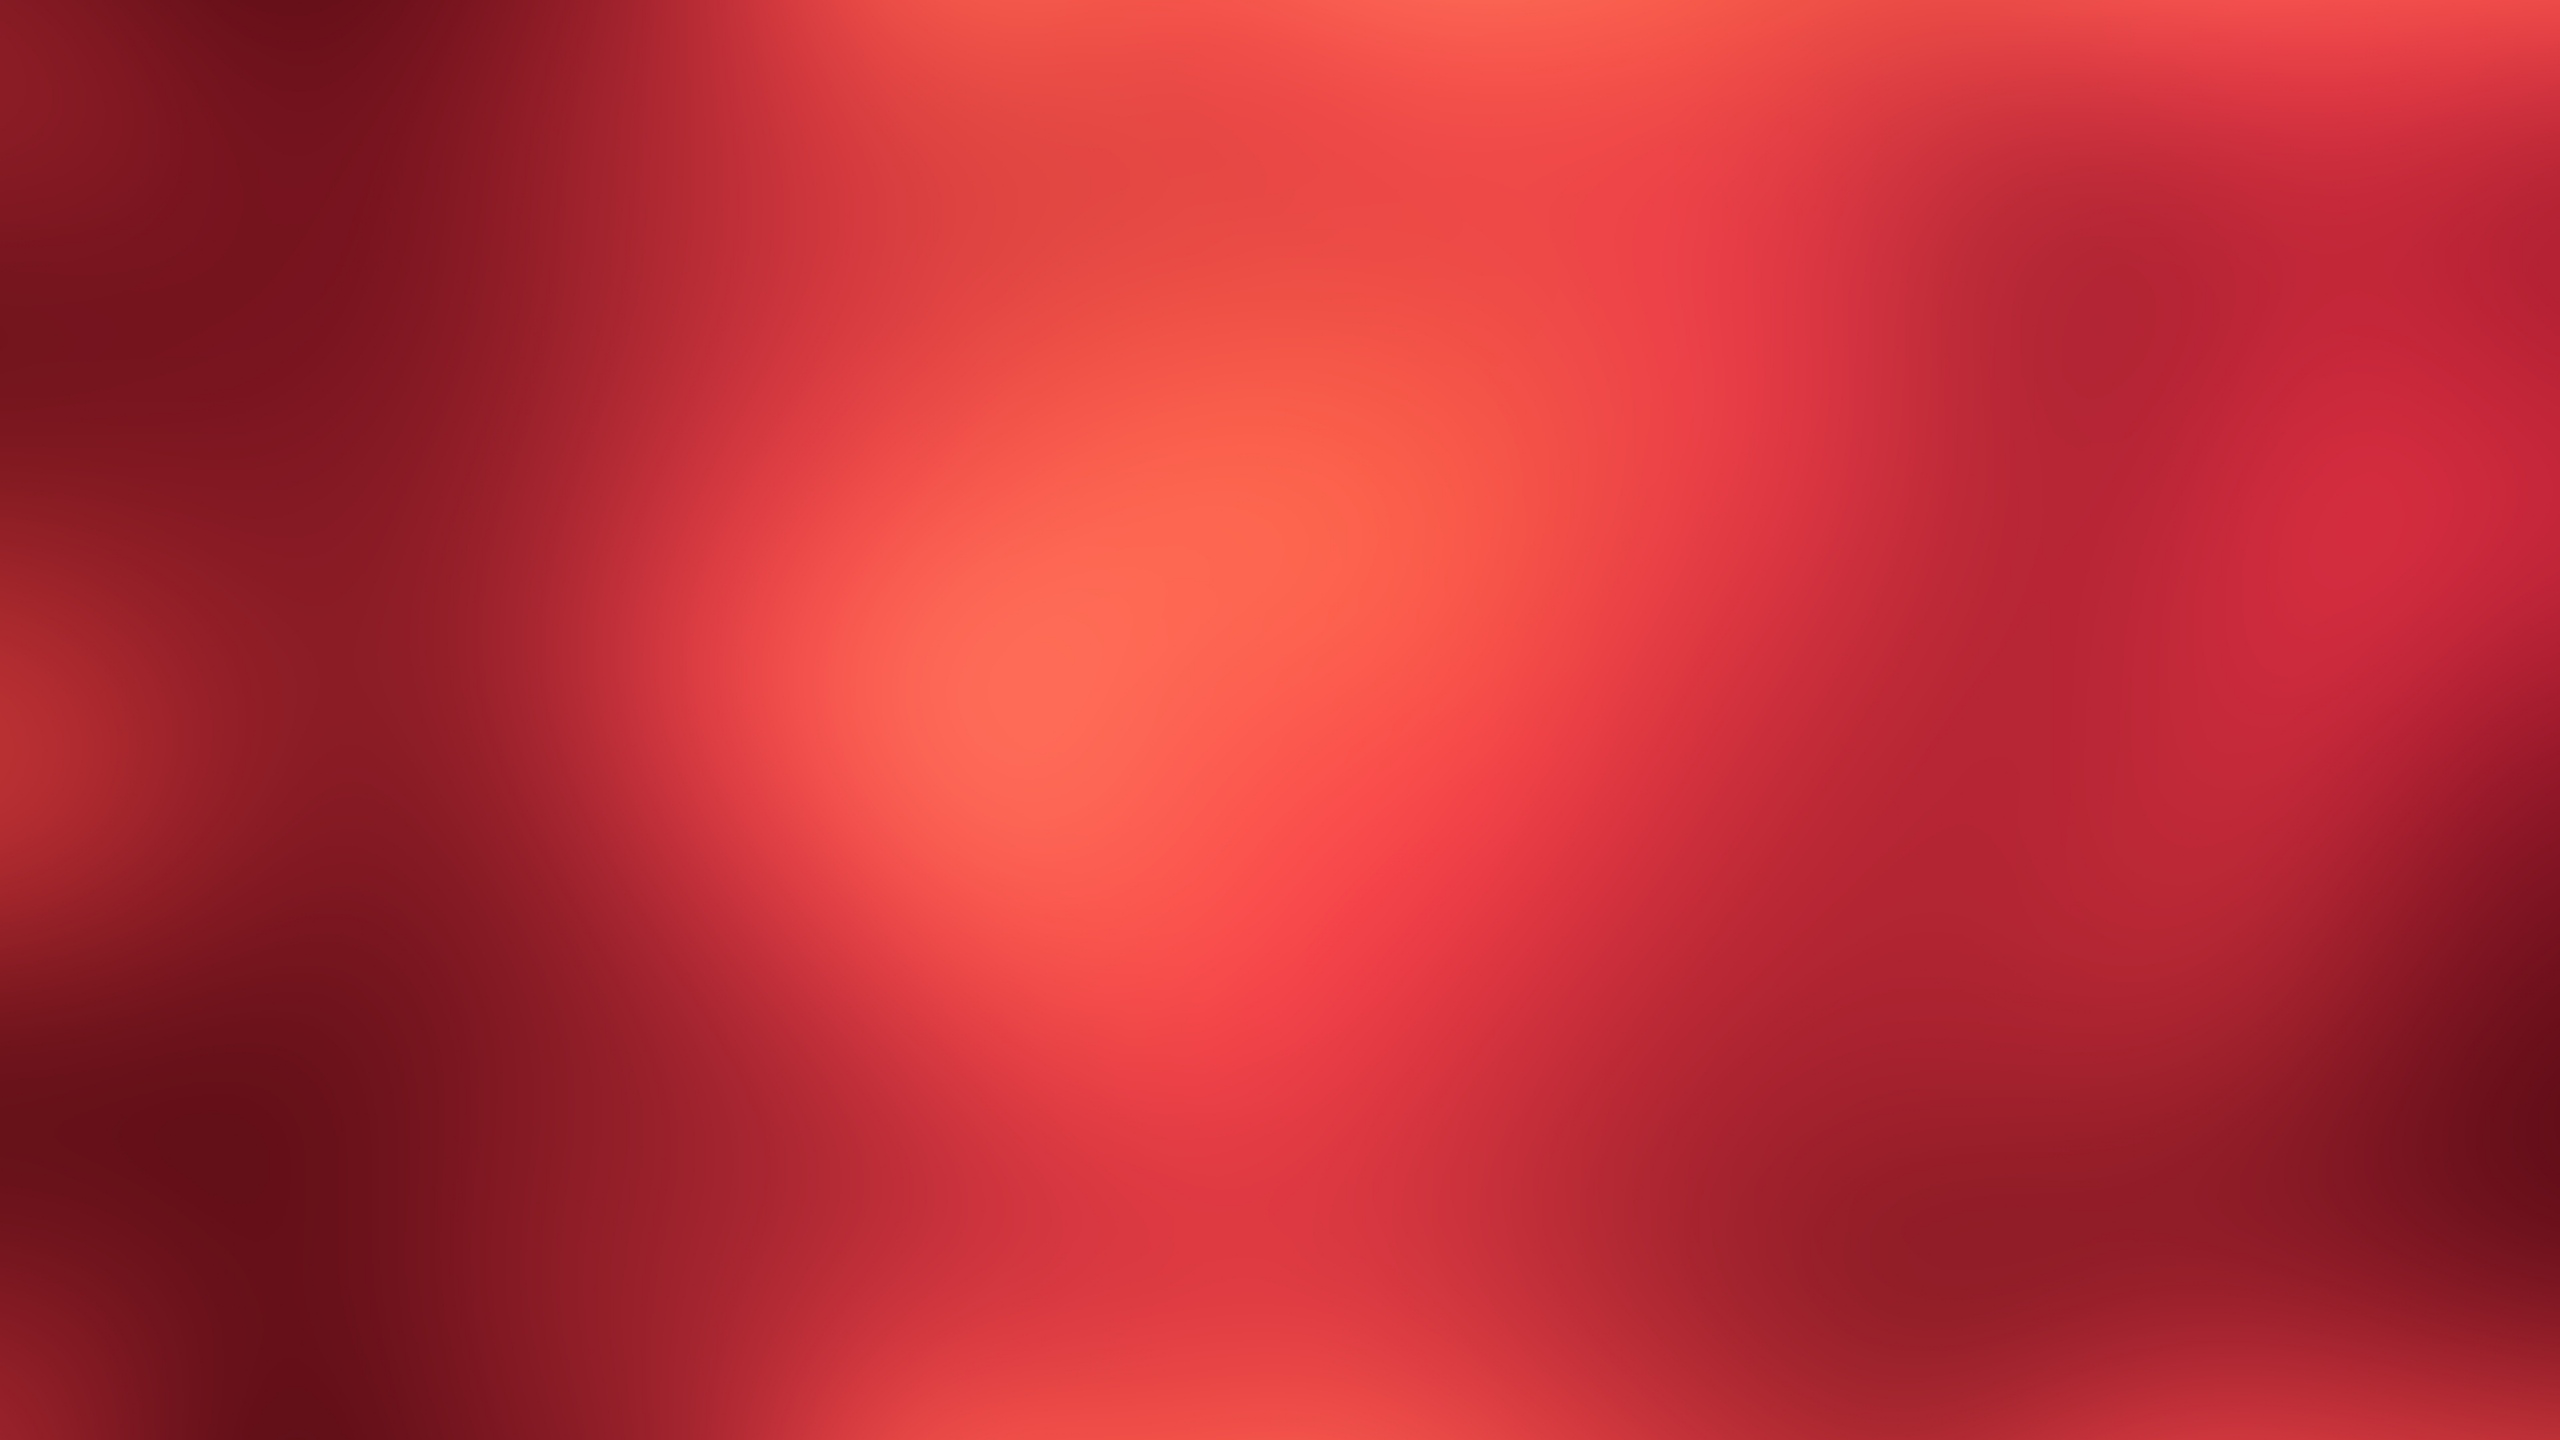 Solid Red Bright Shiny Wallpaper Background Mac Imac